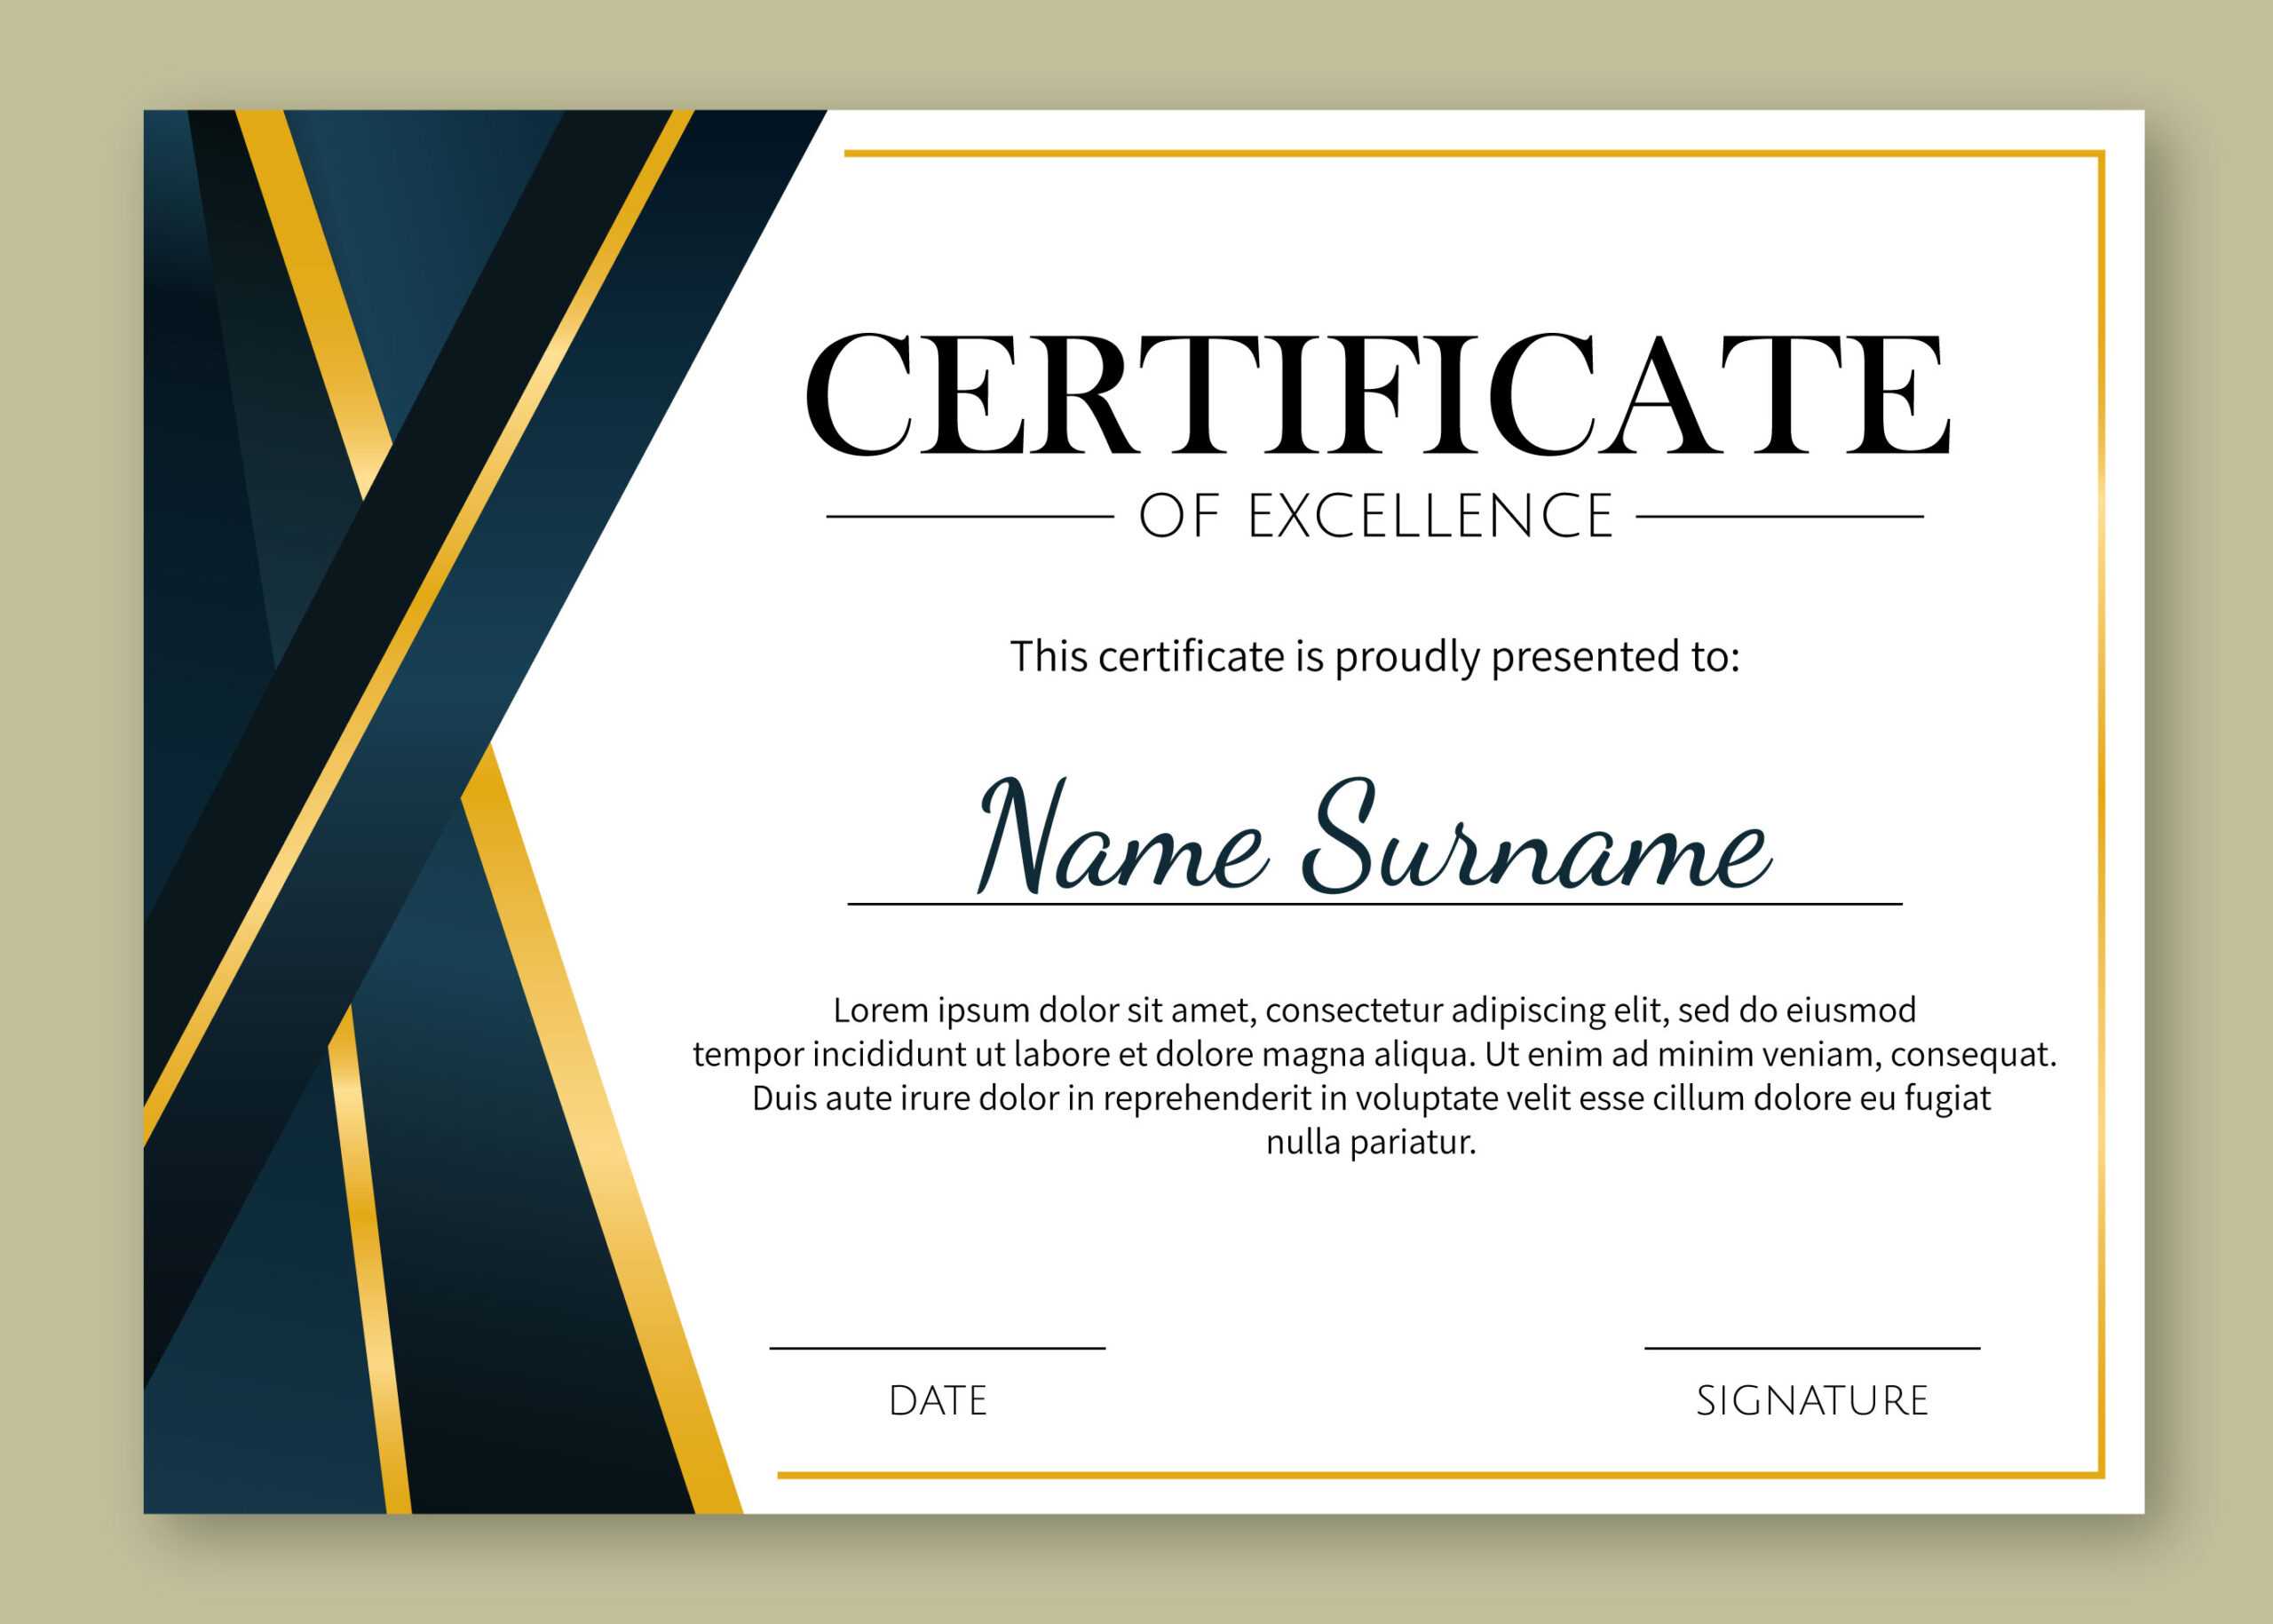 Certificate Of Excellence Template Free Download Within Certificate Of Excellence Template Free Download